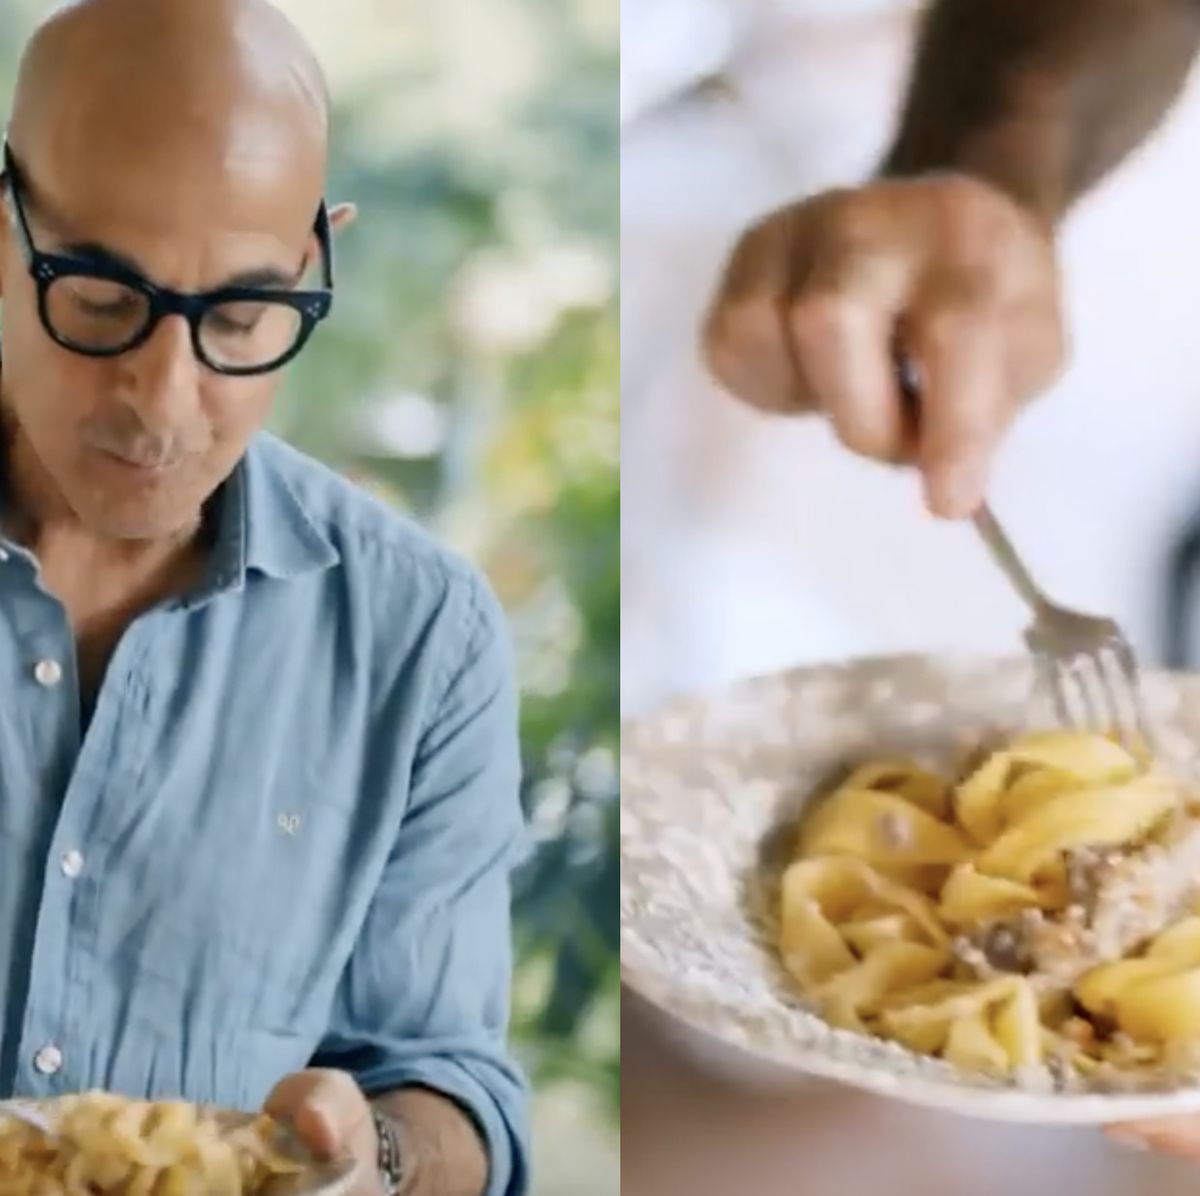 Stanley Tucci Talks Italy, Instagram, and His New Cookware Line